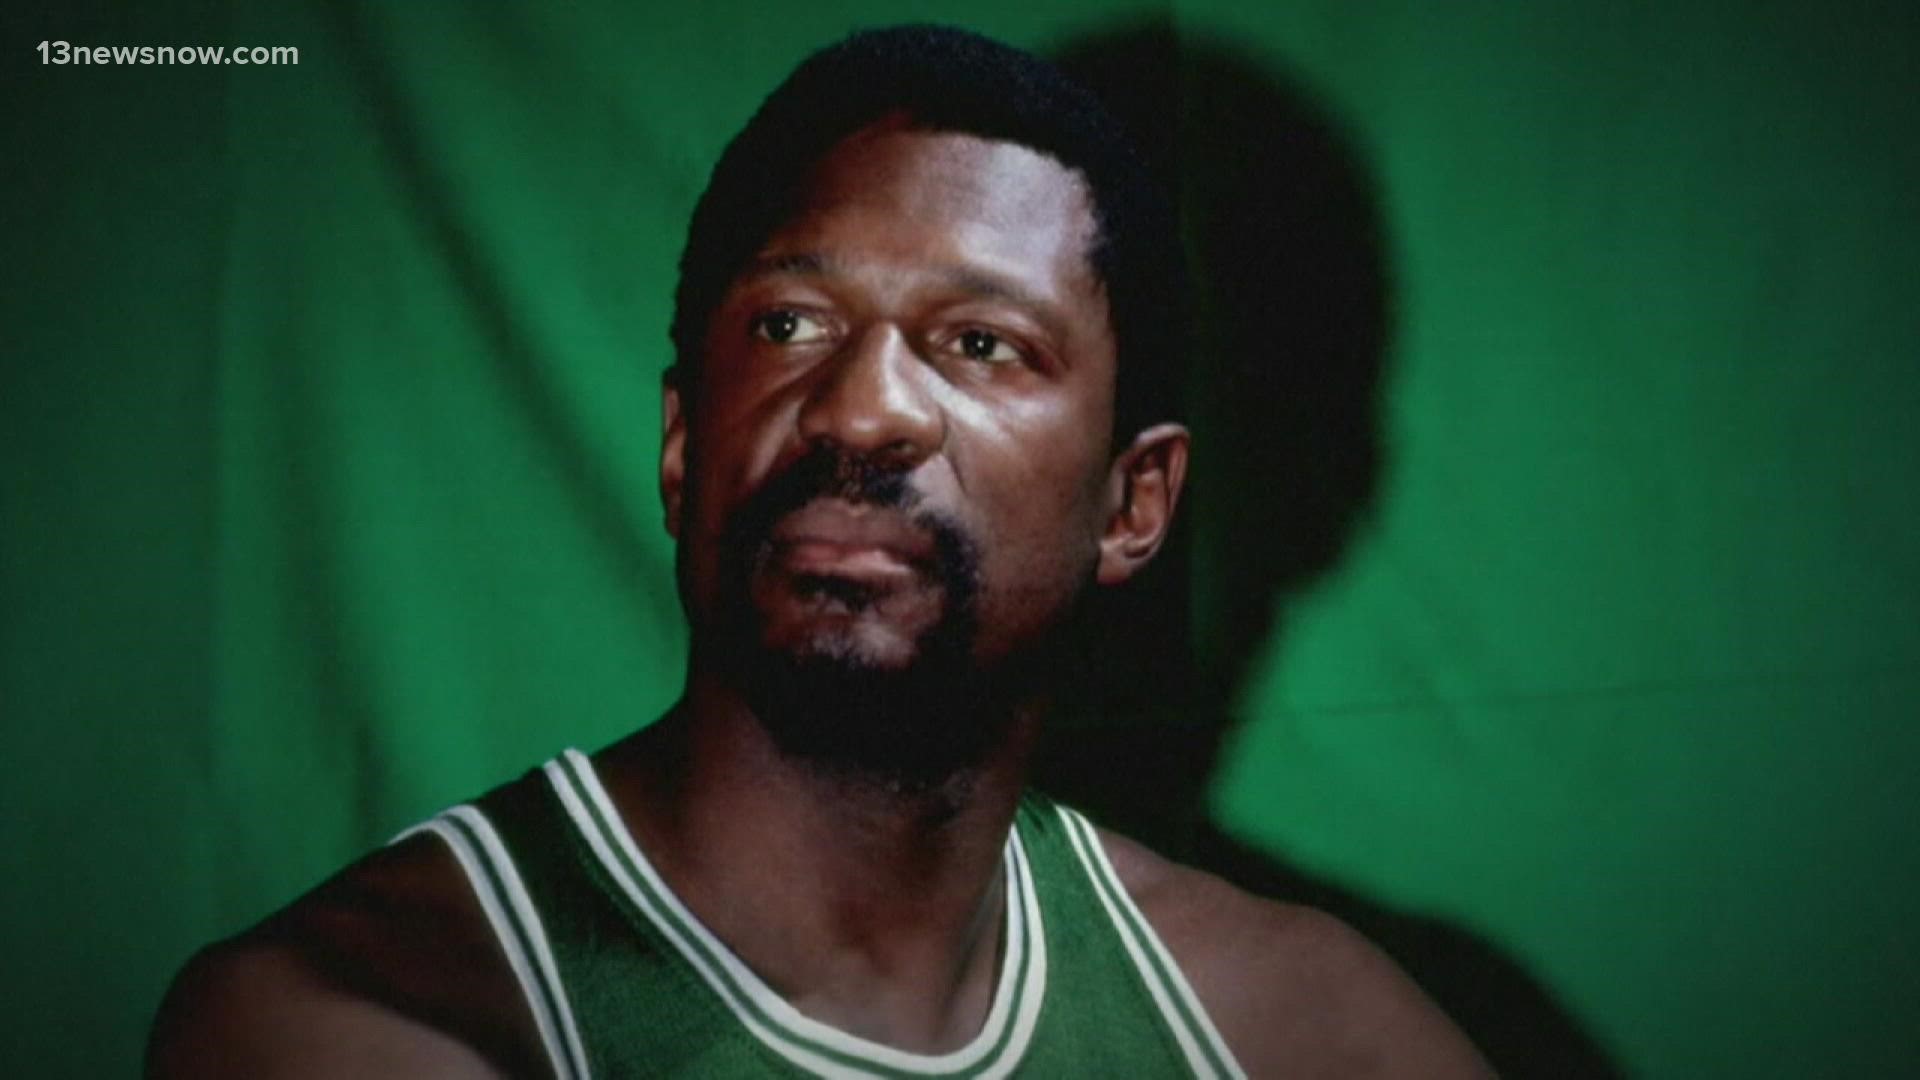 Russell led the Boston Celtics to 11 titles.